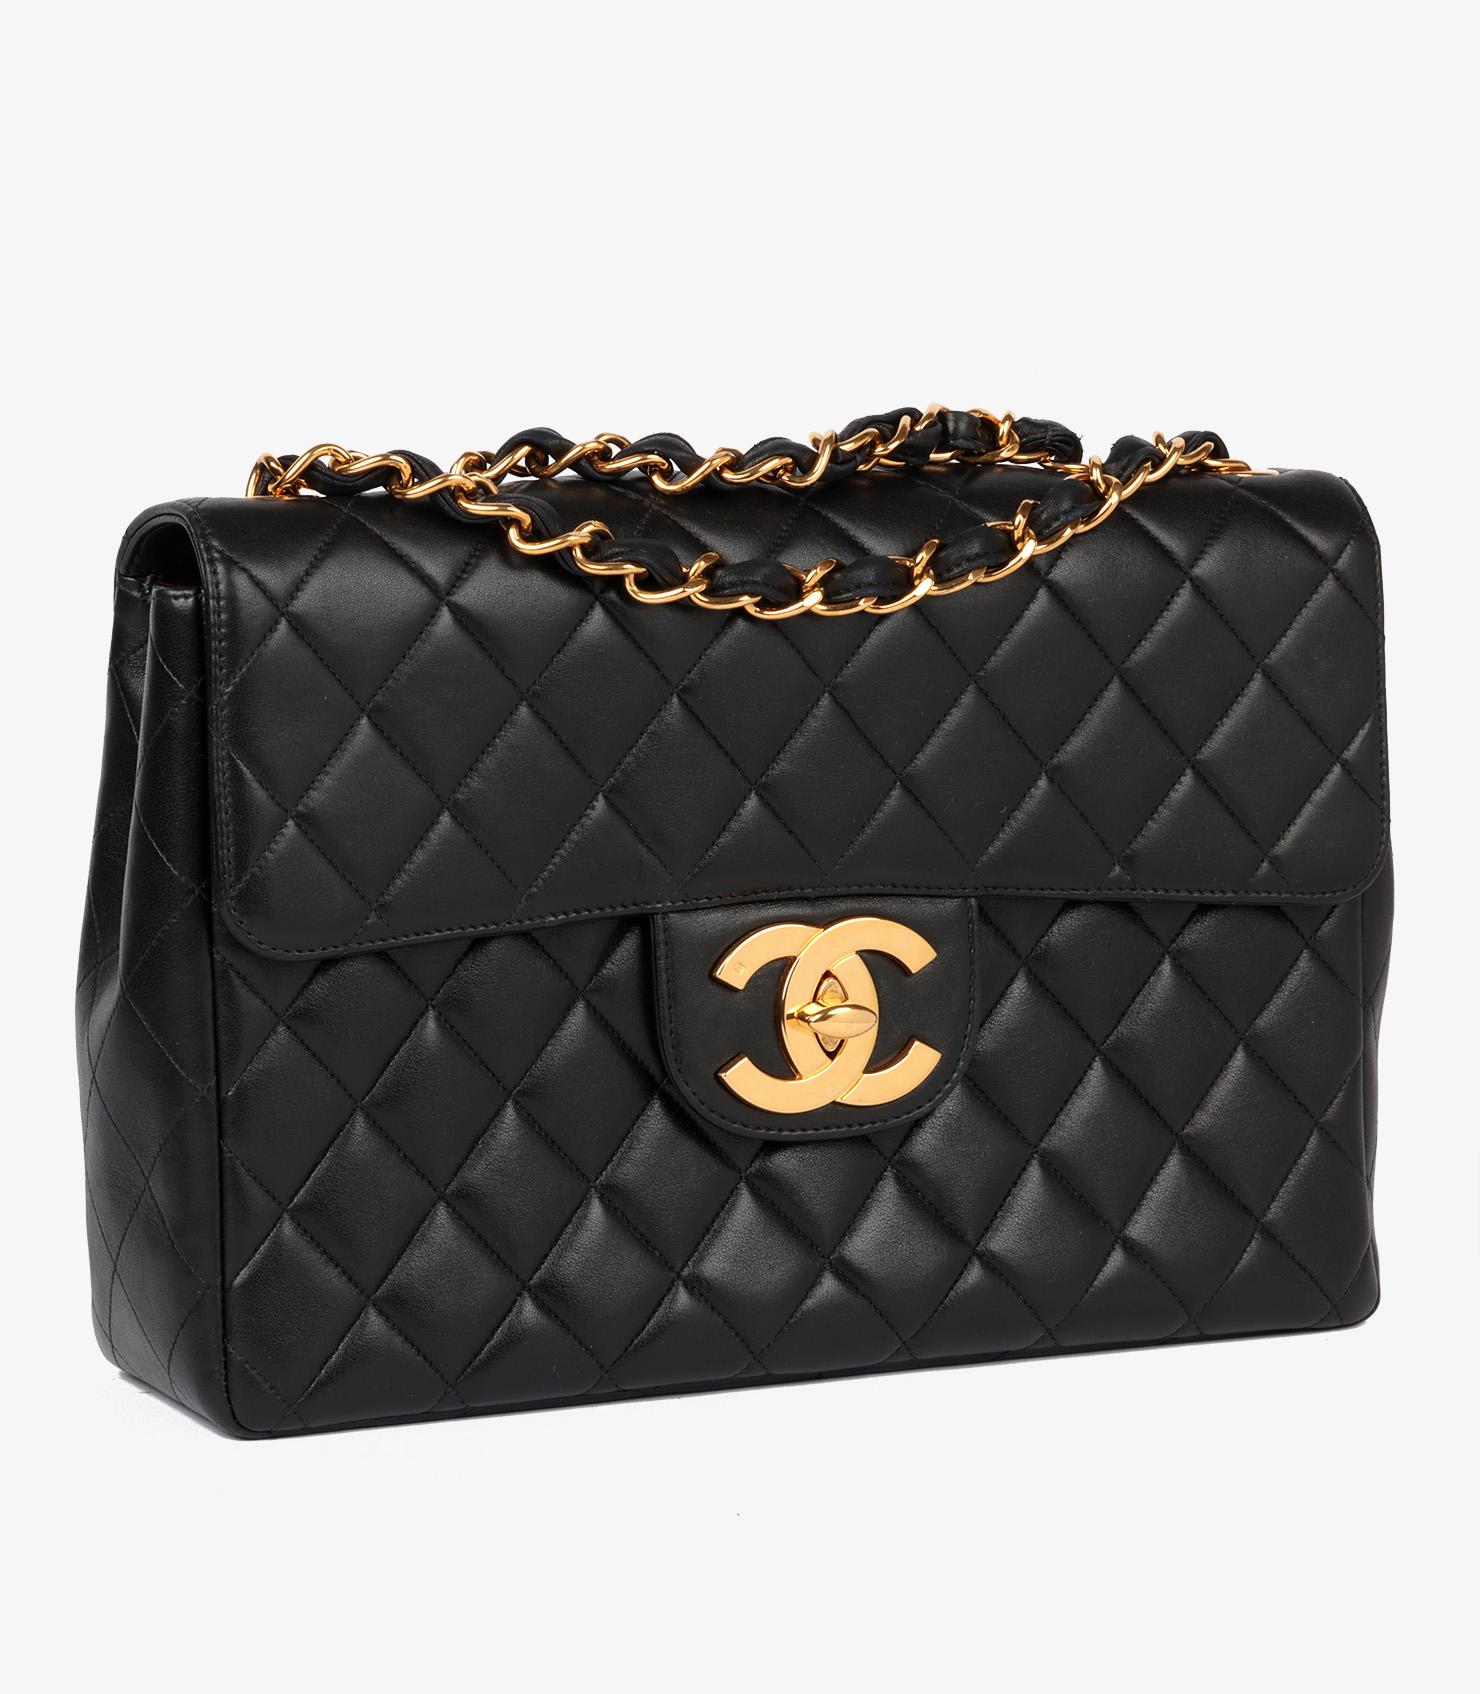 Brand: Chanel
Model: Jumbo XL Classic Single Flap Bag
Product Type: Crossbody, Shoulder
Serial Number: 48*****
Age: Circa 1996
Accompanied By: Care Booklet, Authenticity Card
Colour: Black
Hardware: Gold (24k Plated)
Material(s): Lambskin